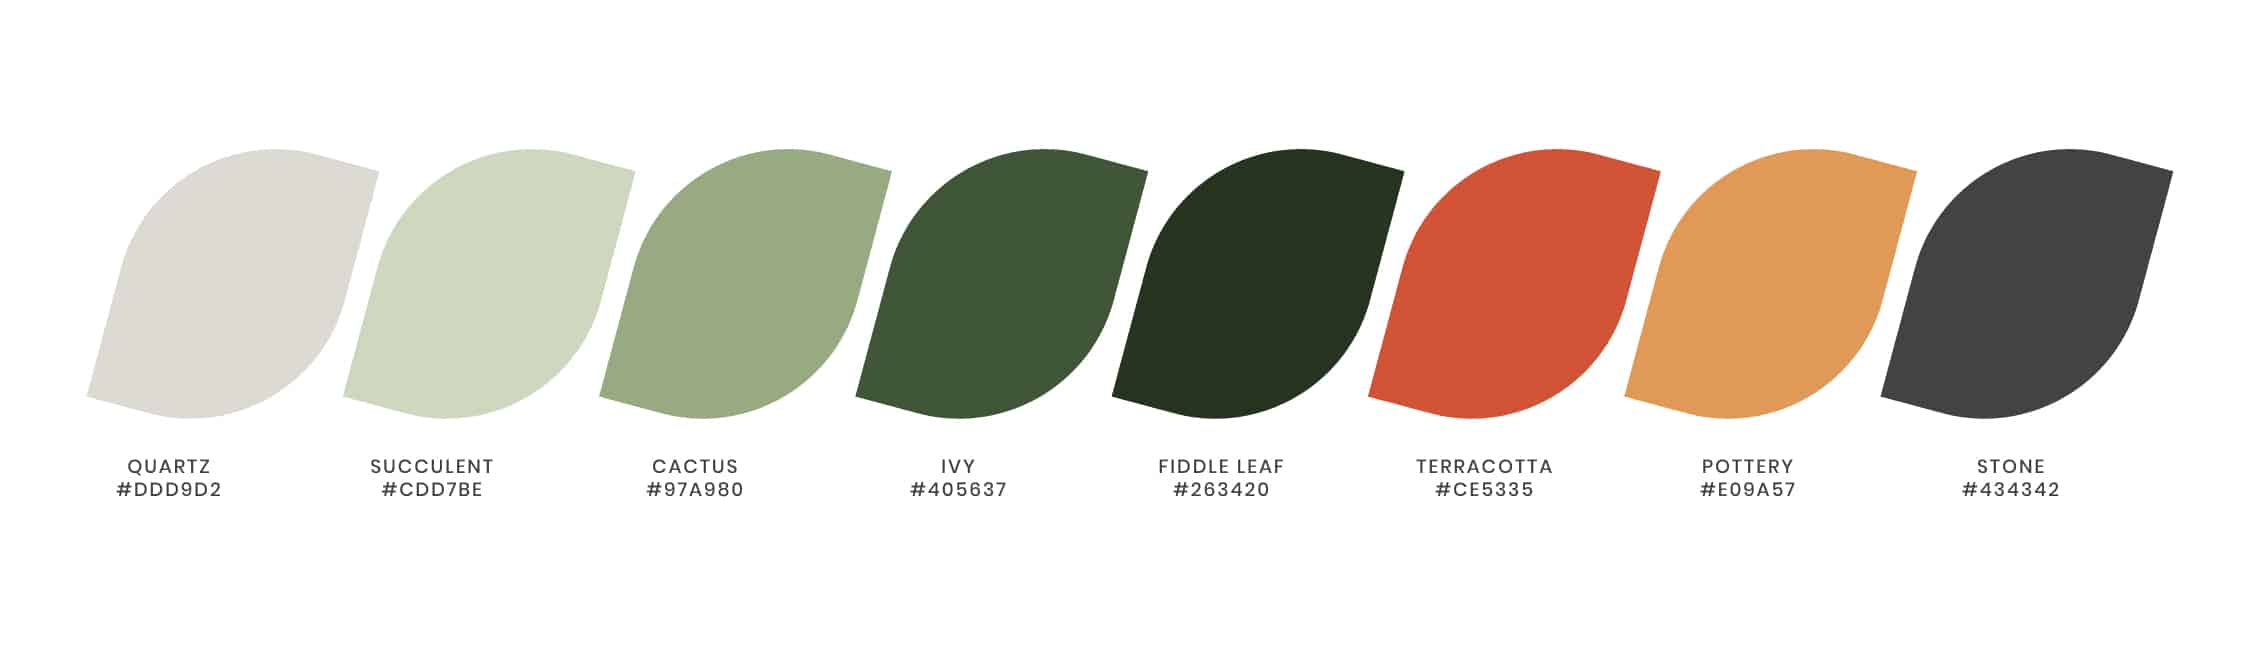 Colors for Prop House Plants by Stellen Design Branding Agency in Los Angeles CA